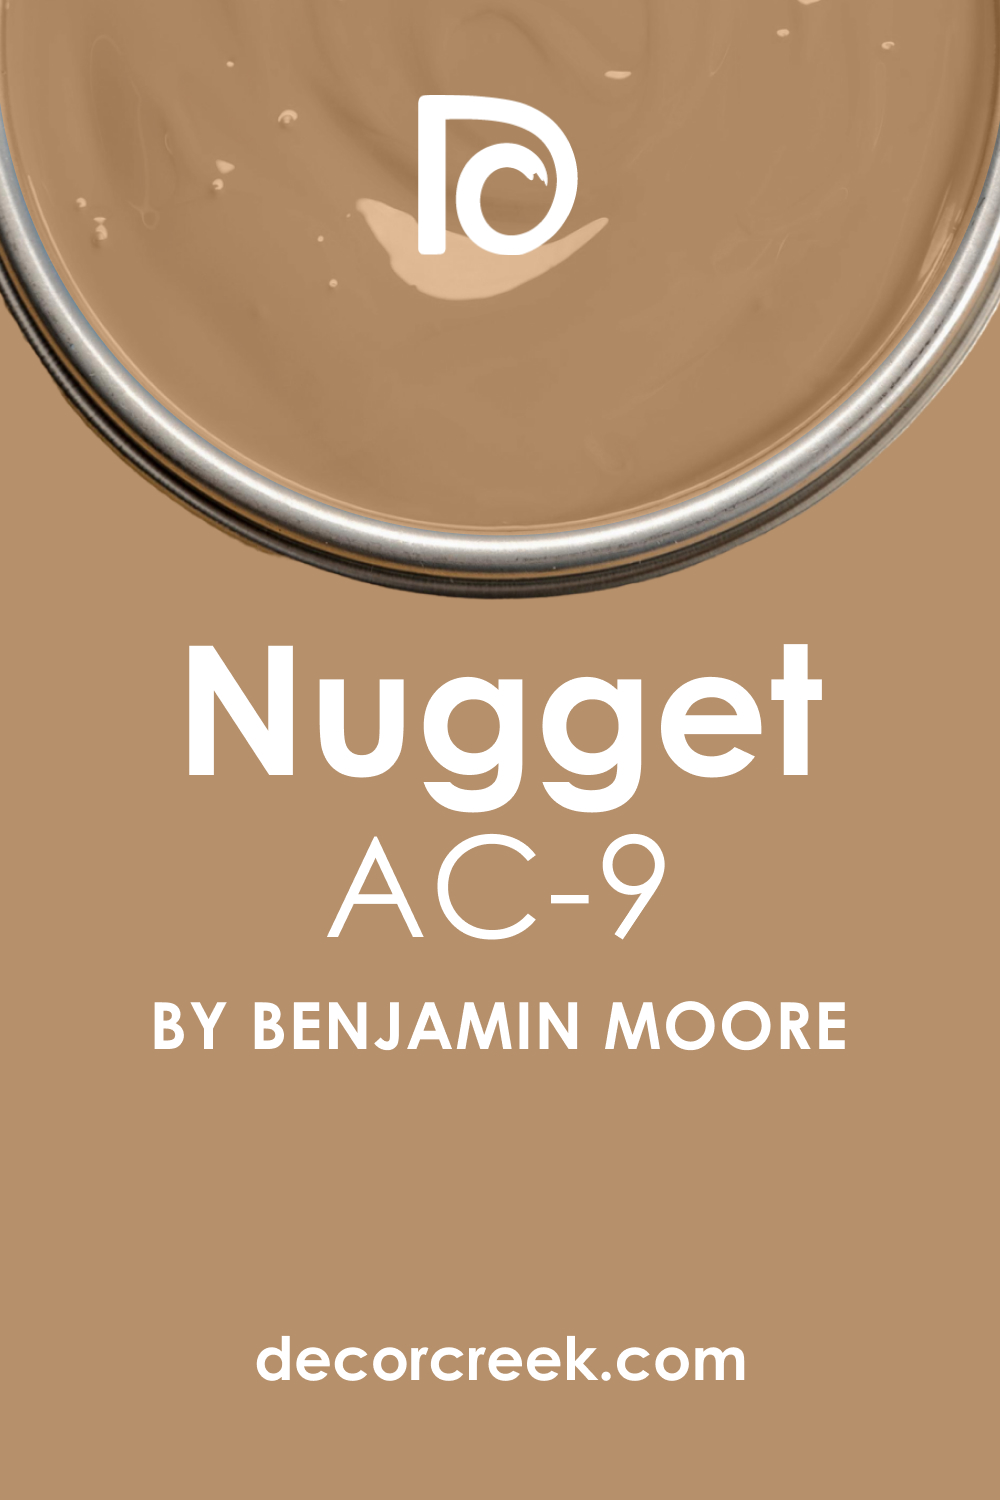 What Color Is Nugget AC-9?